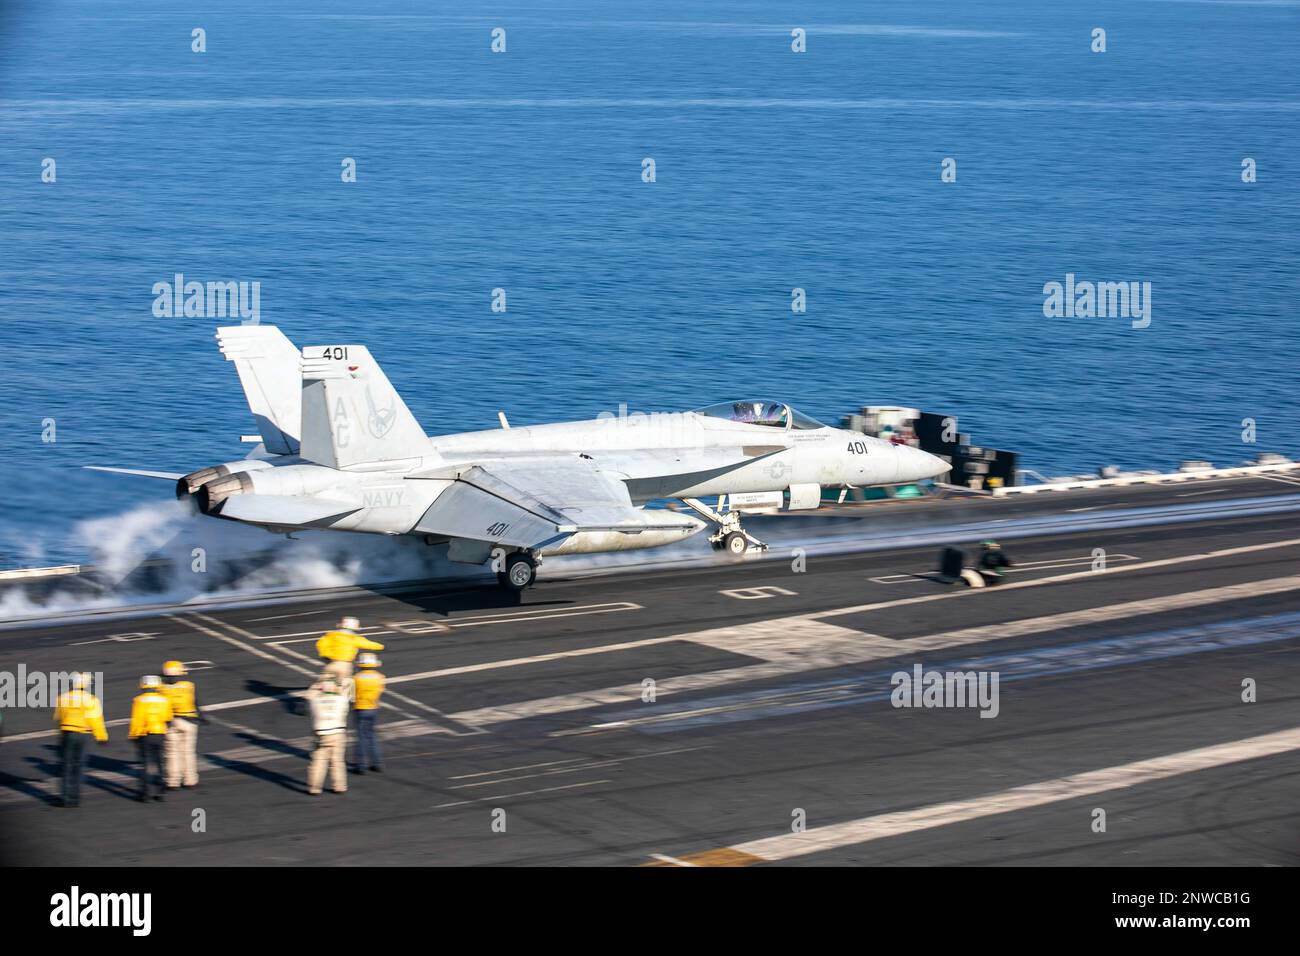 230105-N-EL850-2016 TYRRHENIAN SEA (Jan. 5, 2023) An F/A-18E Super Hornet attached to Strike Fighter Squadron (VFA) 136, launches from the flight deck of the Nimitz-class aircraft carrier USS George H.W. Bush (CVN 77), Jan. 5, 2023. Carrier Air Wing (CVW) 7 is the offensive air and strike component of CSG-10 and the George H.W. Bush CSG. The squadrons of CVW-7 are Strike Fighter Squadron (VFA) 143, VFA-103, VFA-86, VFA-136, Carrier Airborne Early Warning Squadron (VAW) 121, VAQ-140, Helicopter Sea Combat Squadron (HSC) 5, and Helicopter Maritime Strike Squadron (HSM) 46. The George H.W. Bush C Stock Photo